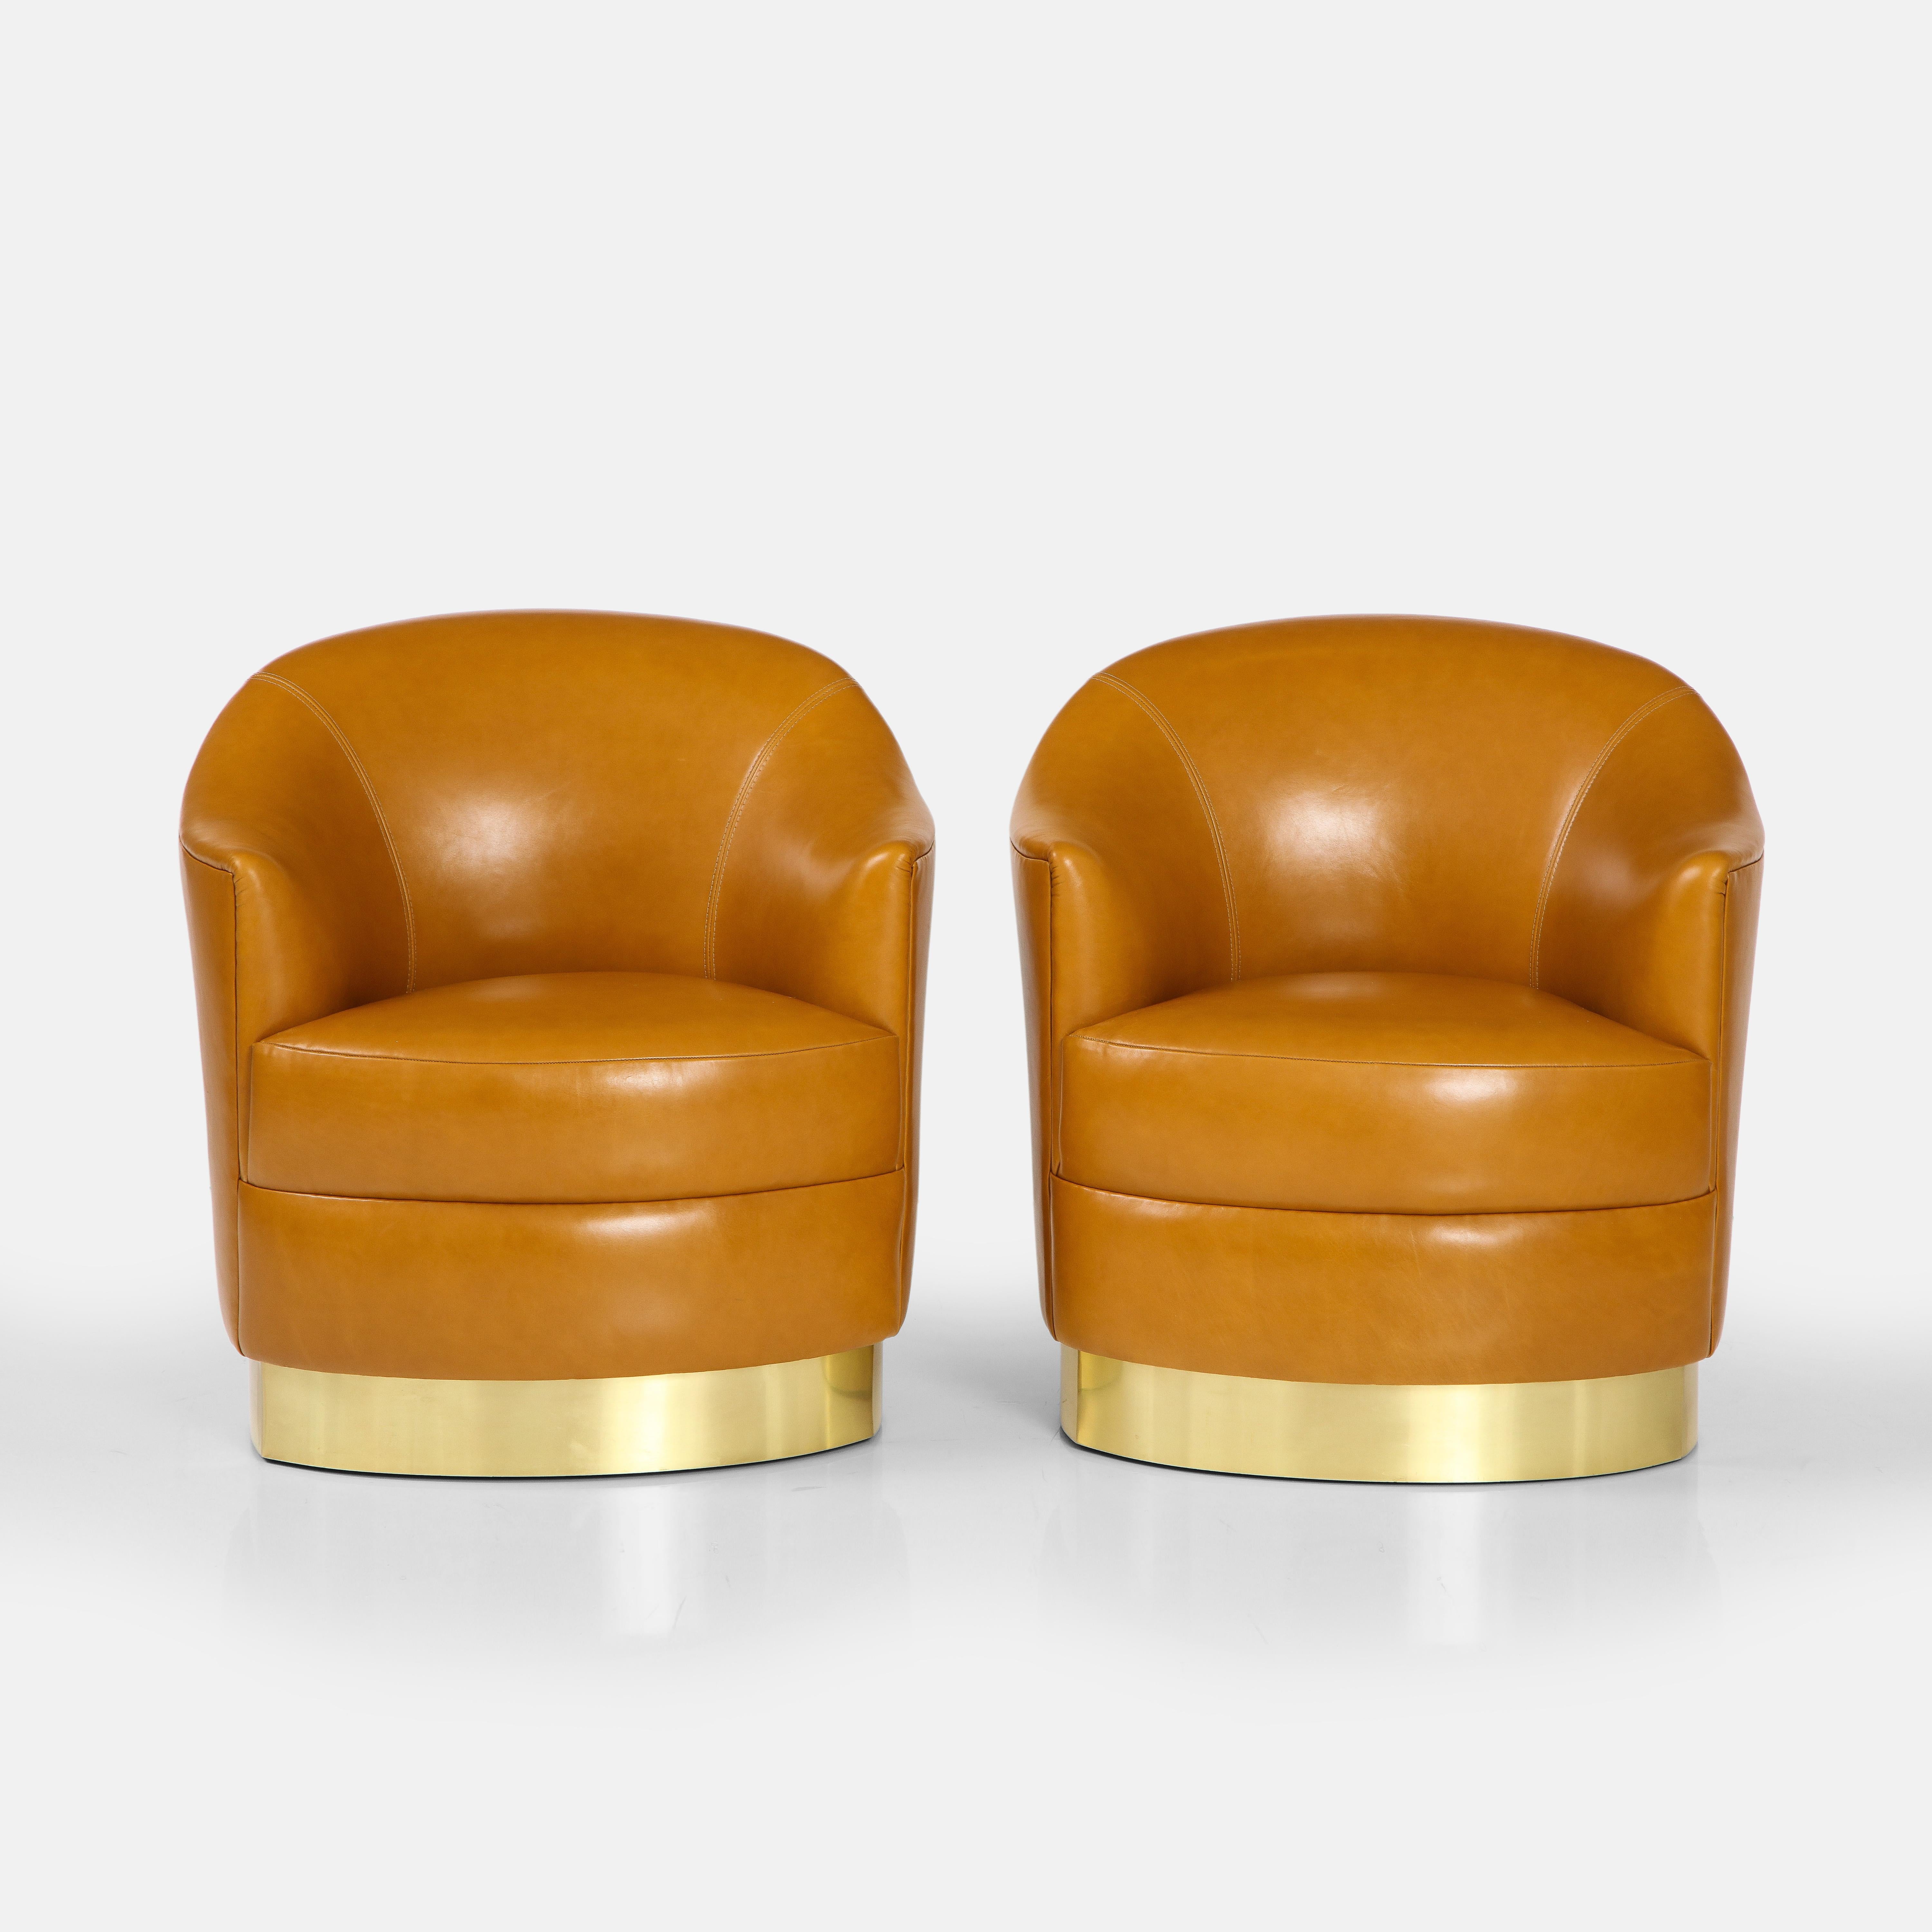 Karl Springer documented rare pair of club chairs in cognac or saddle leather with brass bases, USA, 1980s. This incredibly chic pair of club chairs is more common in the swivel version, but this model is very rare as lounge chairs.  They have